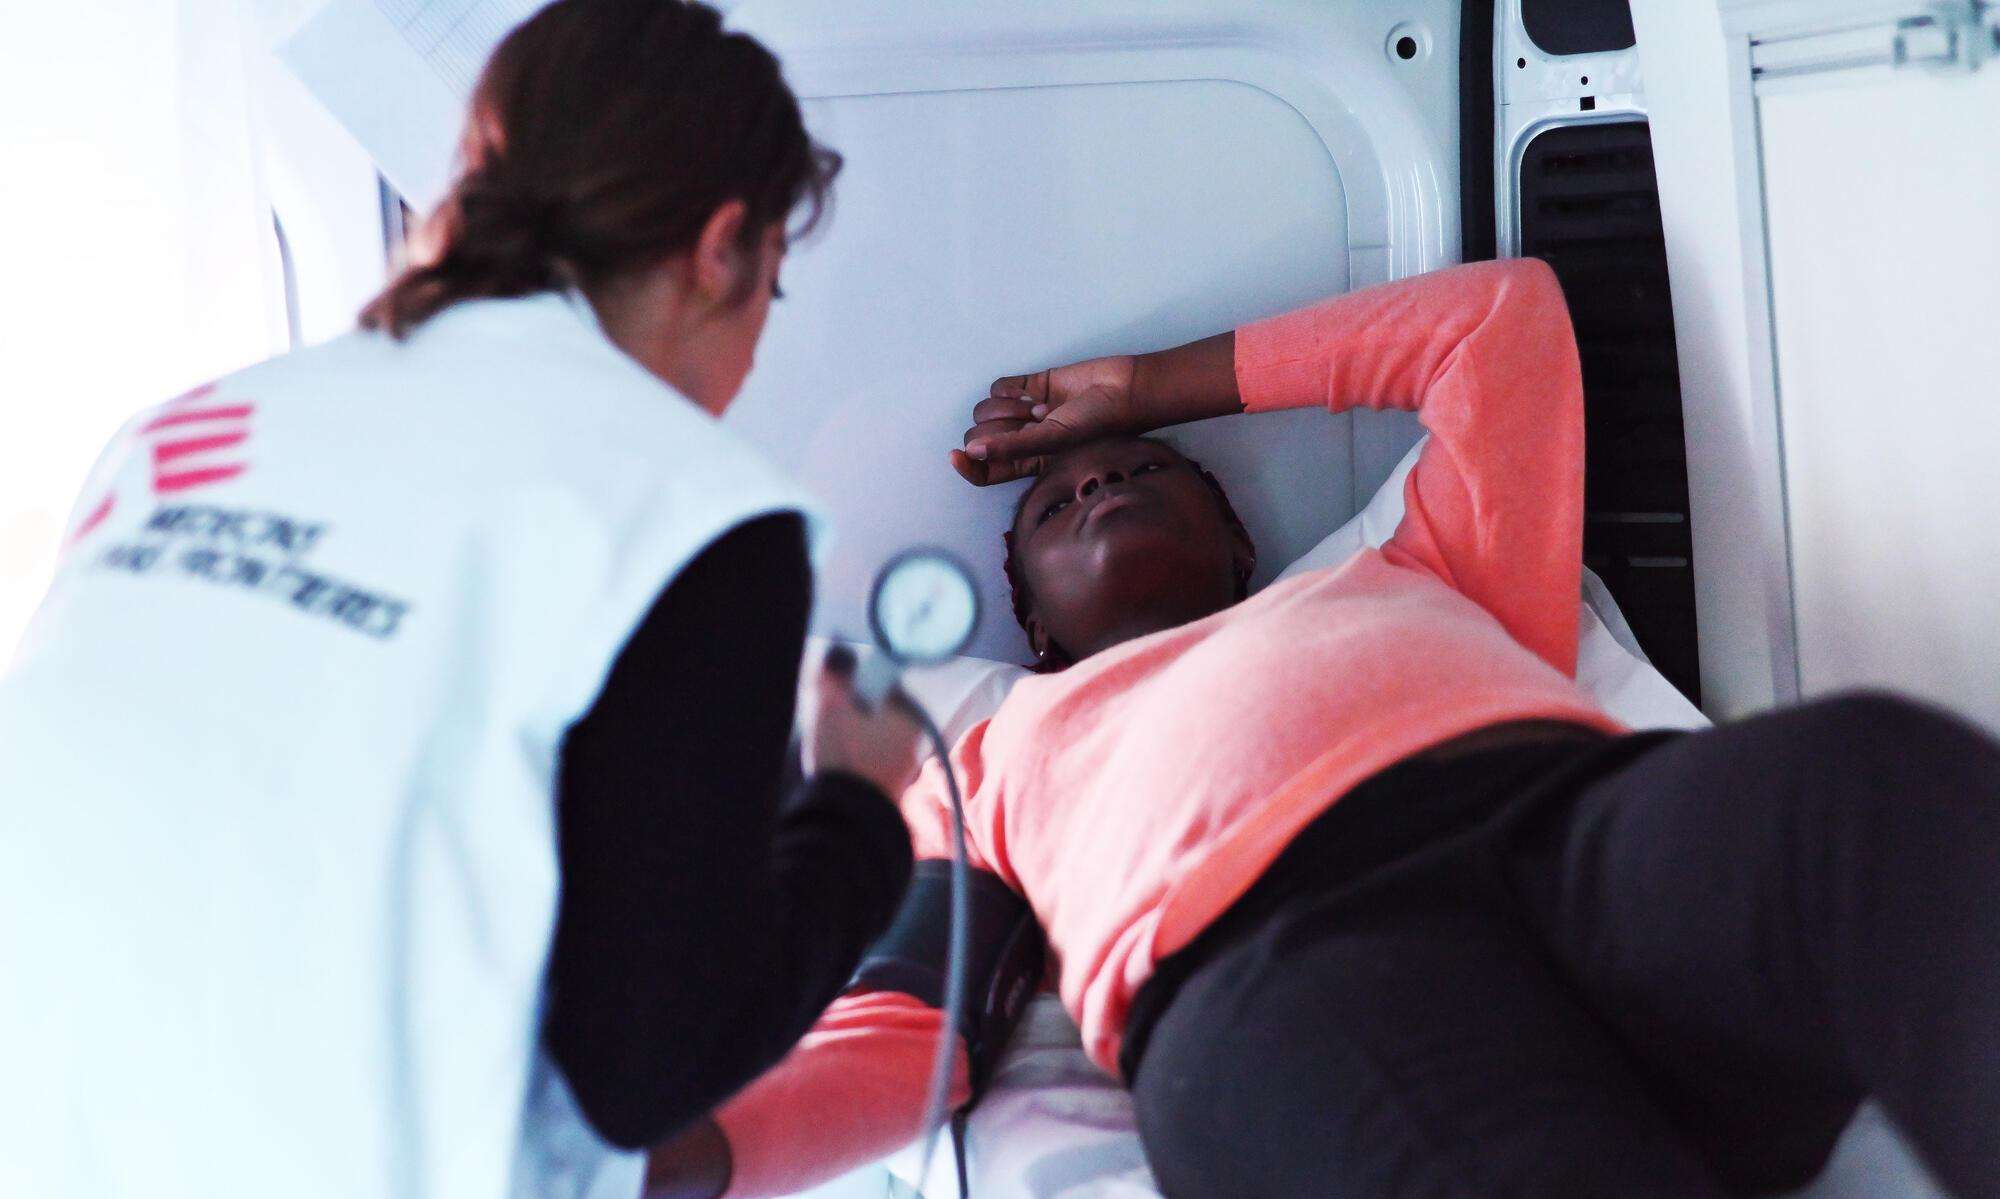 MSF widwife, Alessia Alberani, during a consultation with a pregnant patient in the mobile clinic in Ventimiglia, Italy